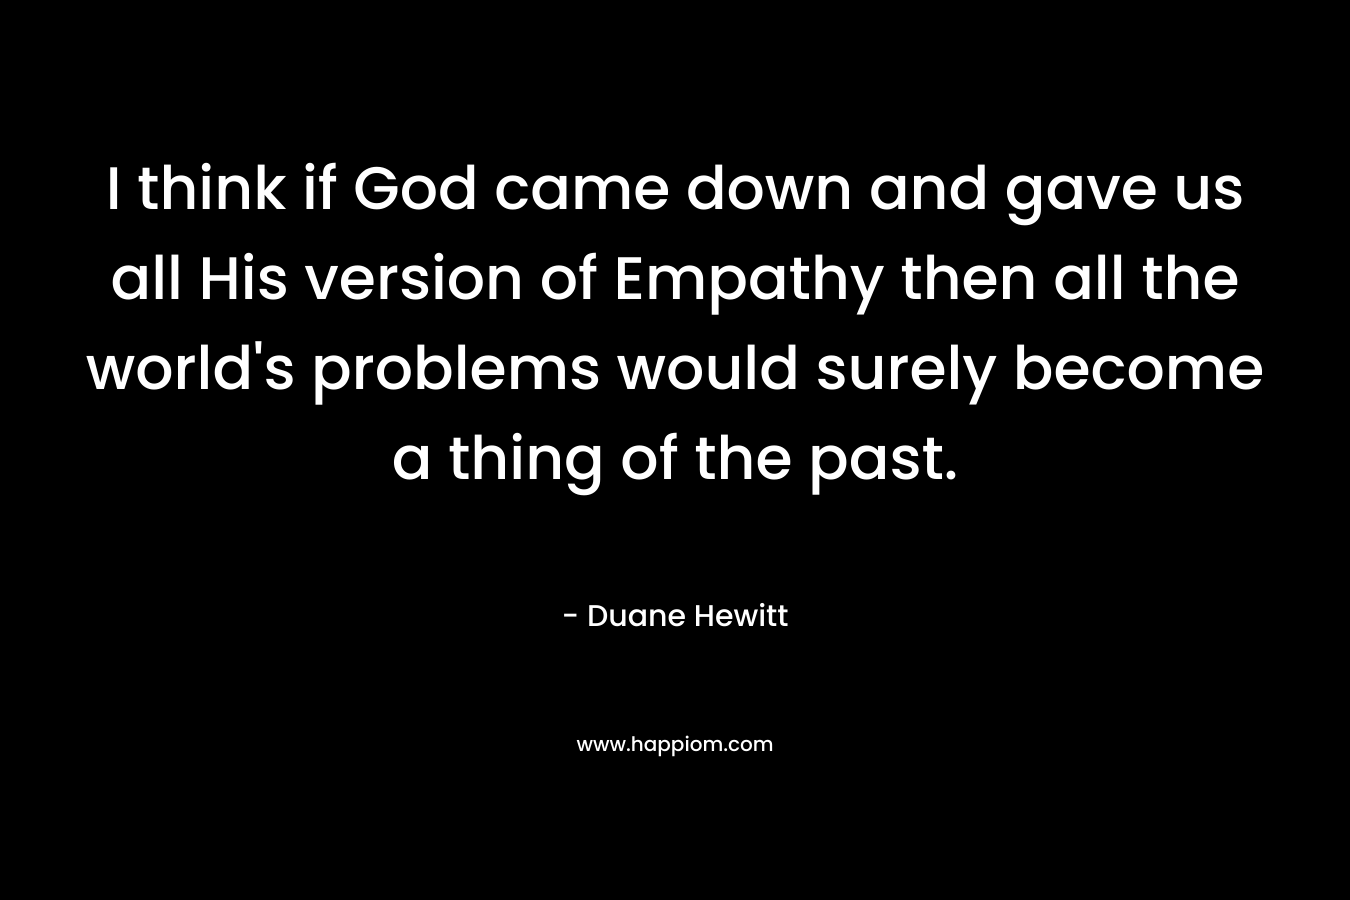 I think if God came down and gave us all His version of Empathy then all the world’s problems would surely become a thing of the past. – Duane Hewitt